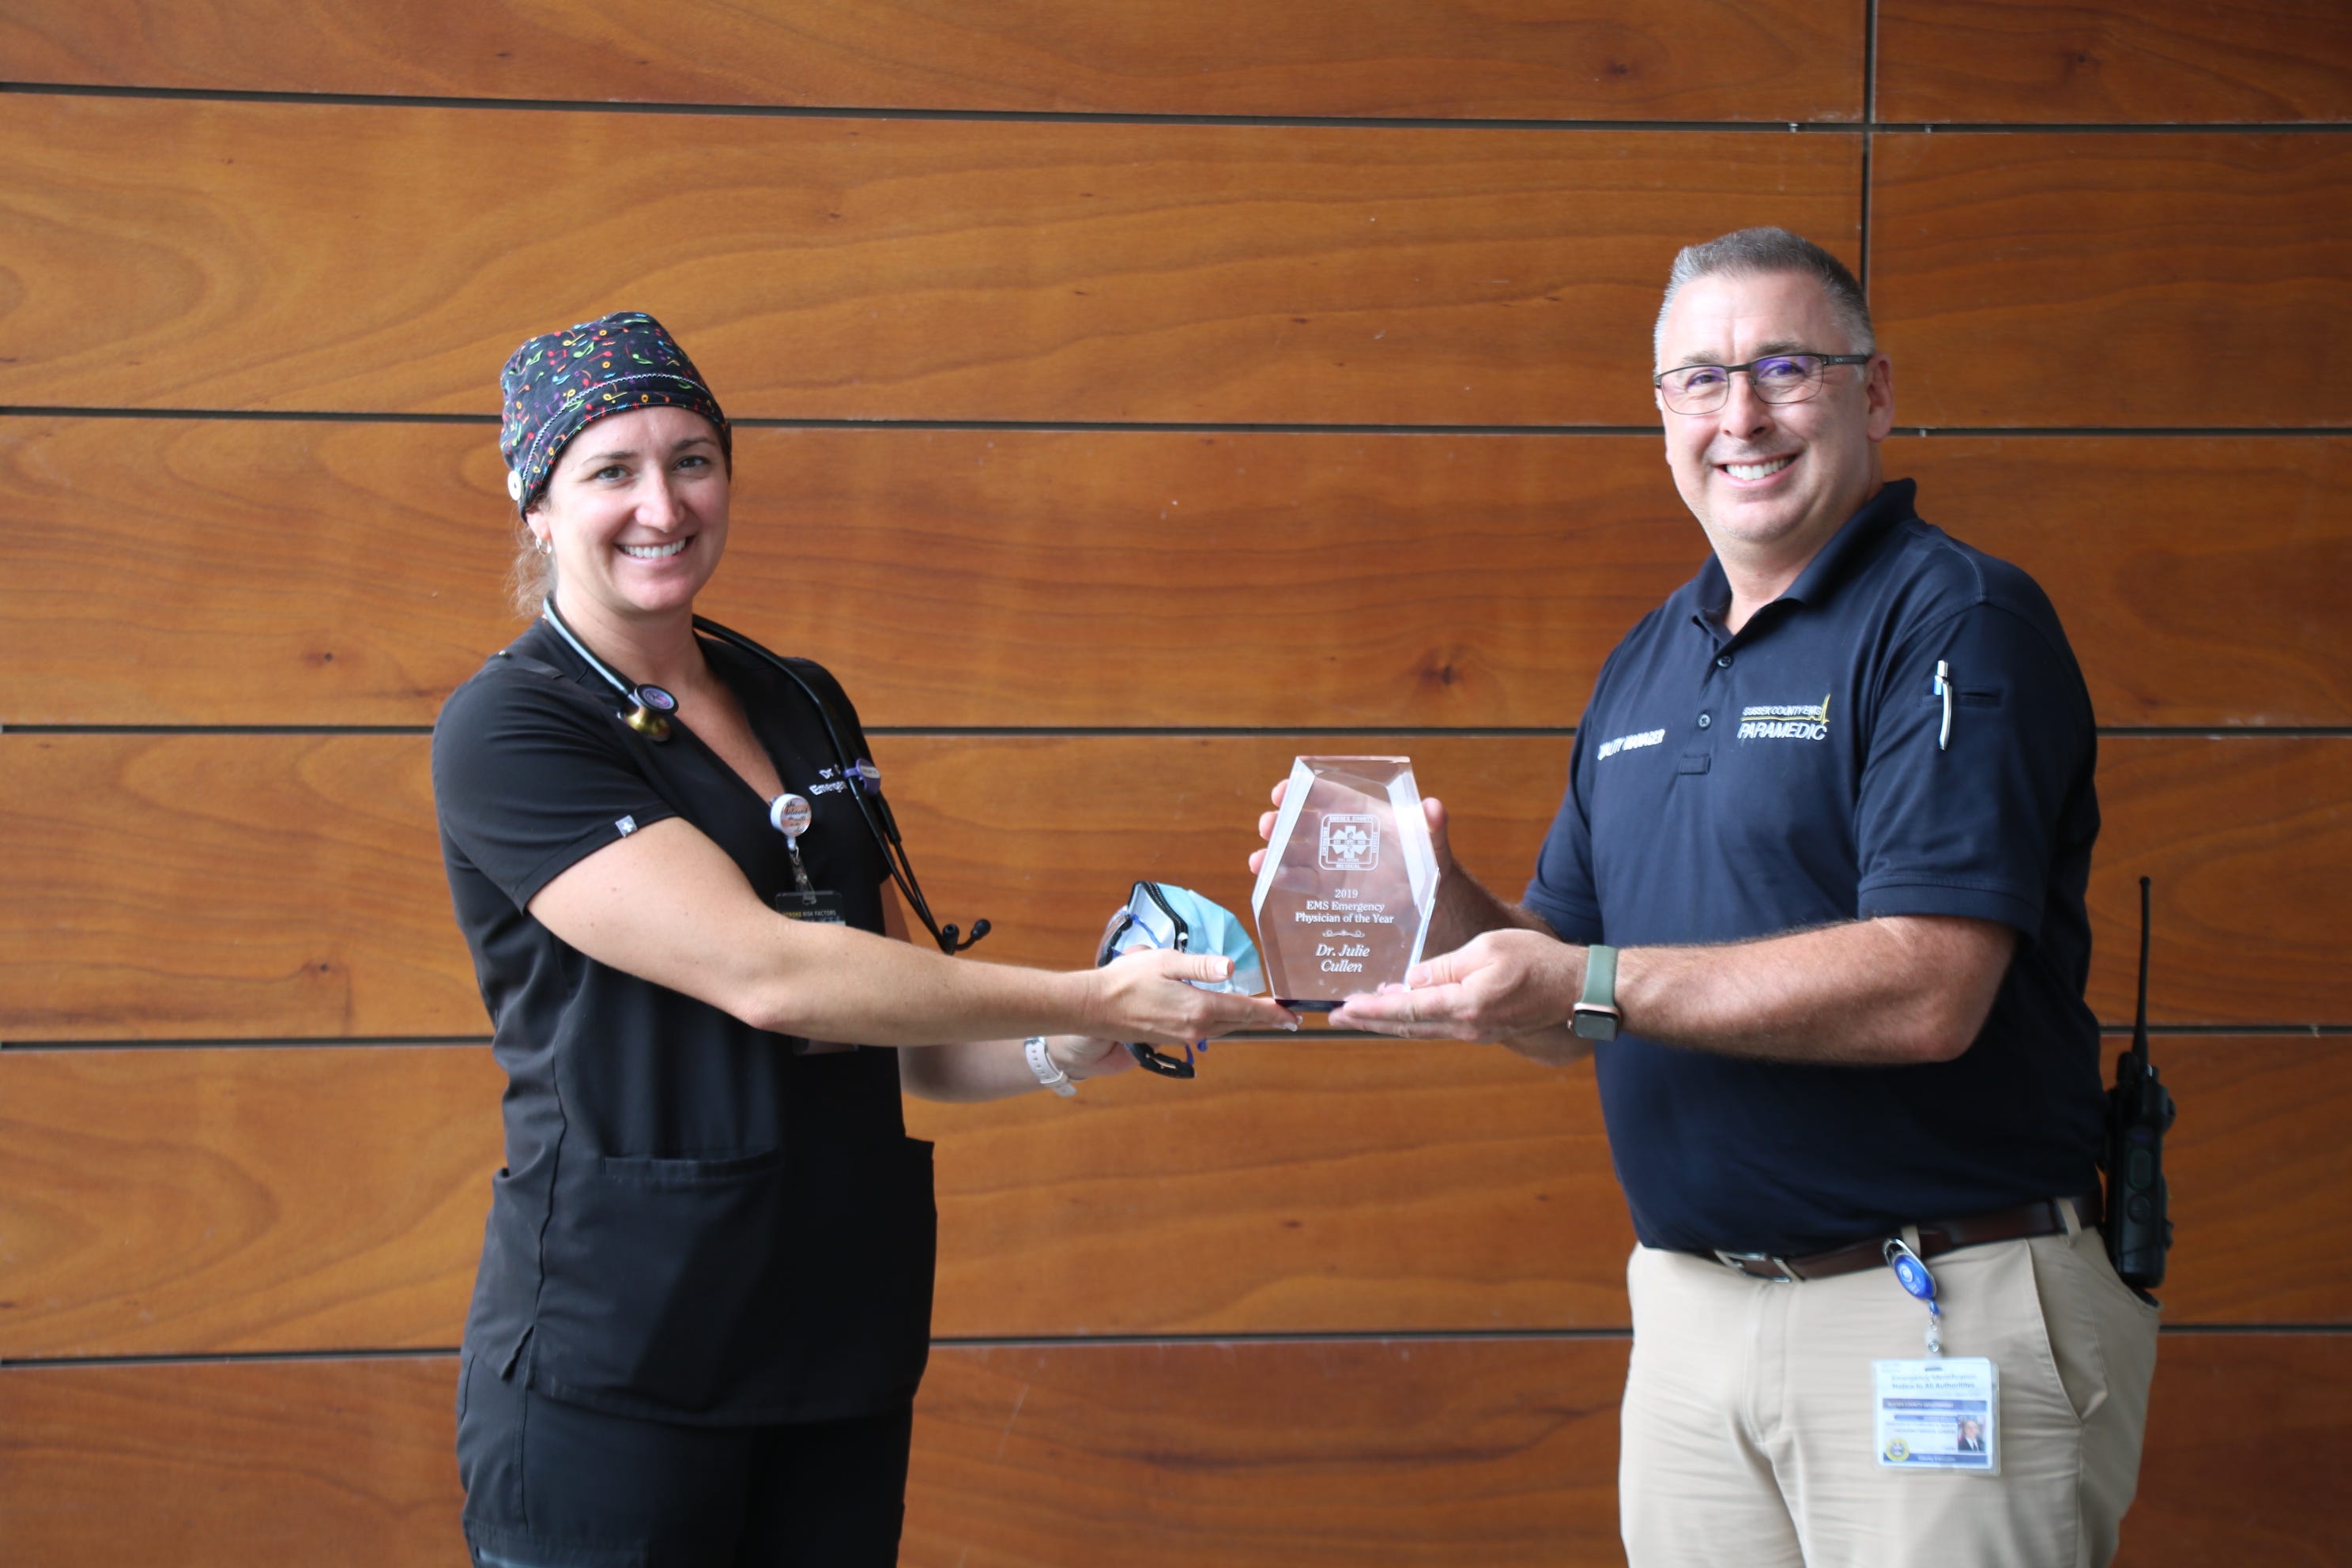 Julie Cullen, assistant medical director at Bayhealth Emergency and Trauma Center, Sussex Campus, was recognized as 2019 Emergency Physician of the Year by Sussex County Emergency Medical Services Director Robert Murrary.